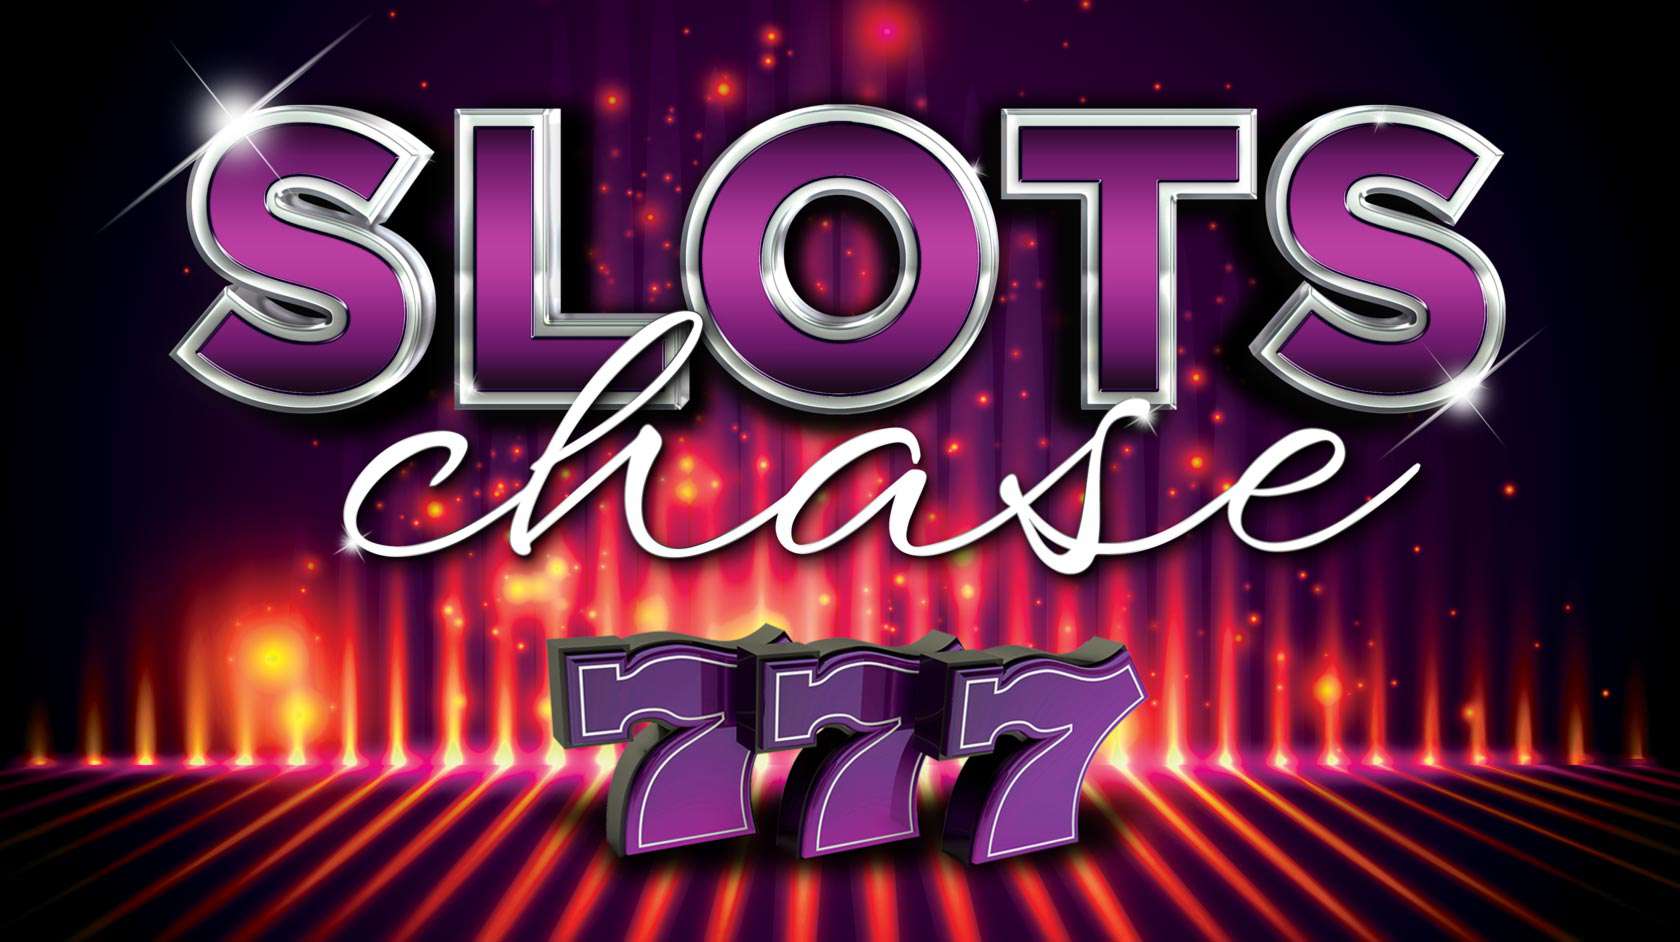 Slots Chase 777 gaming promotion poster